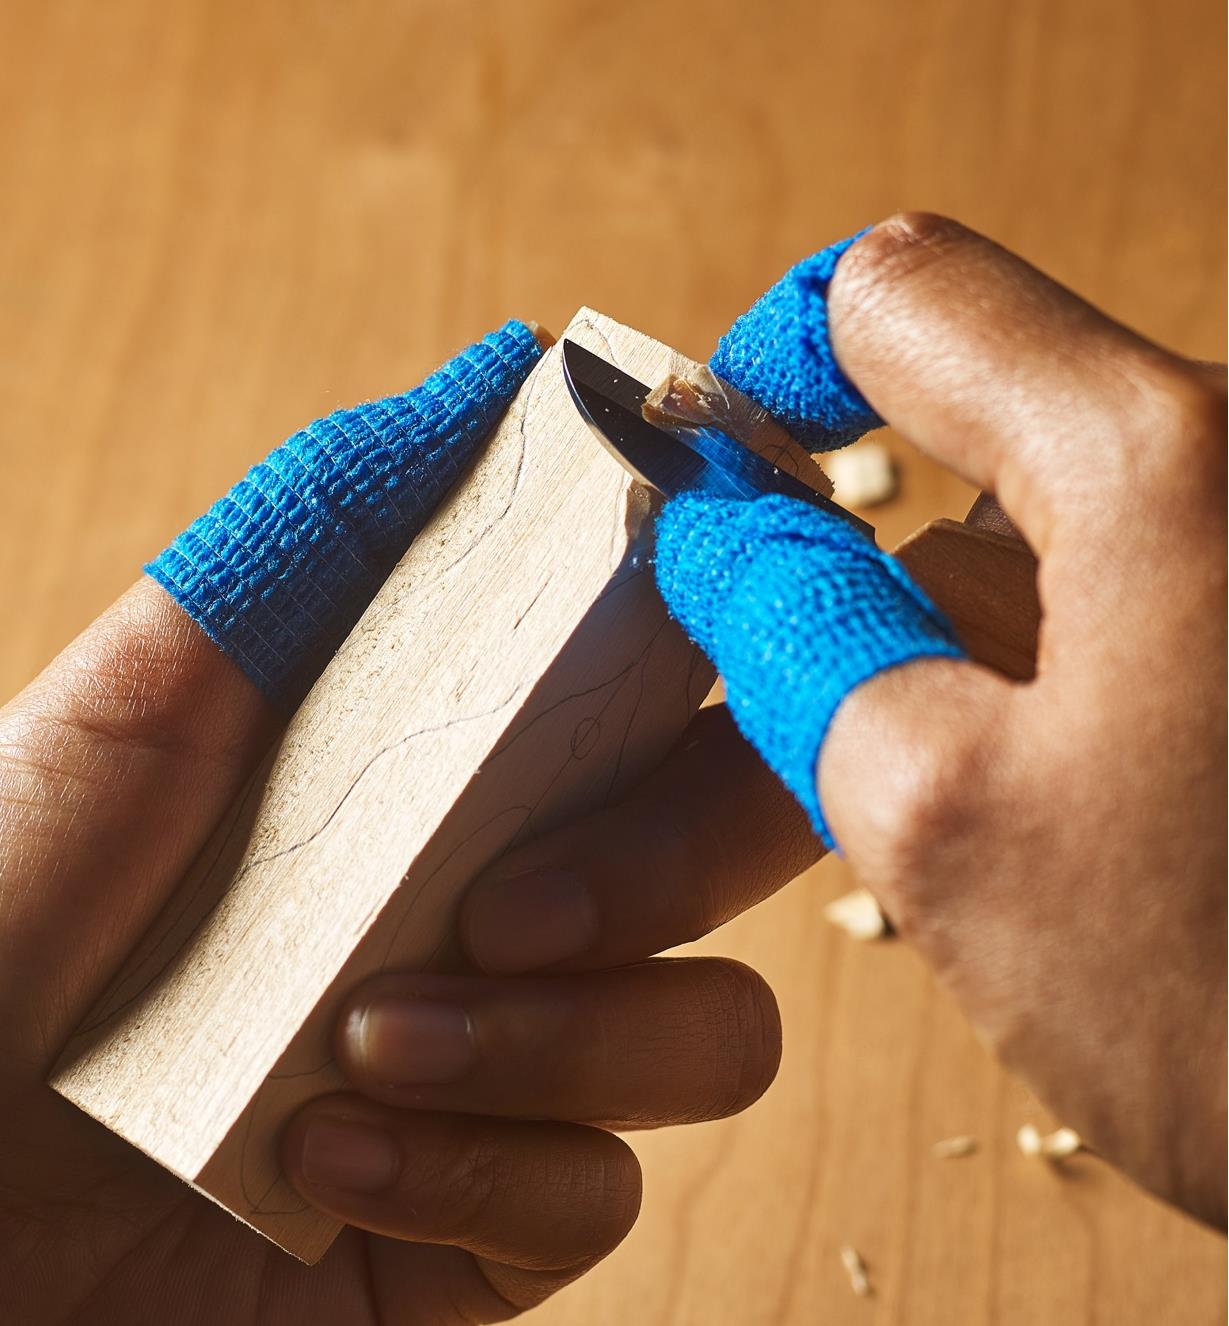 A person wearing finger guard tape beginning to carve a wood blank with a carving knife